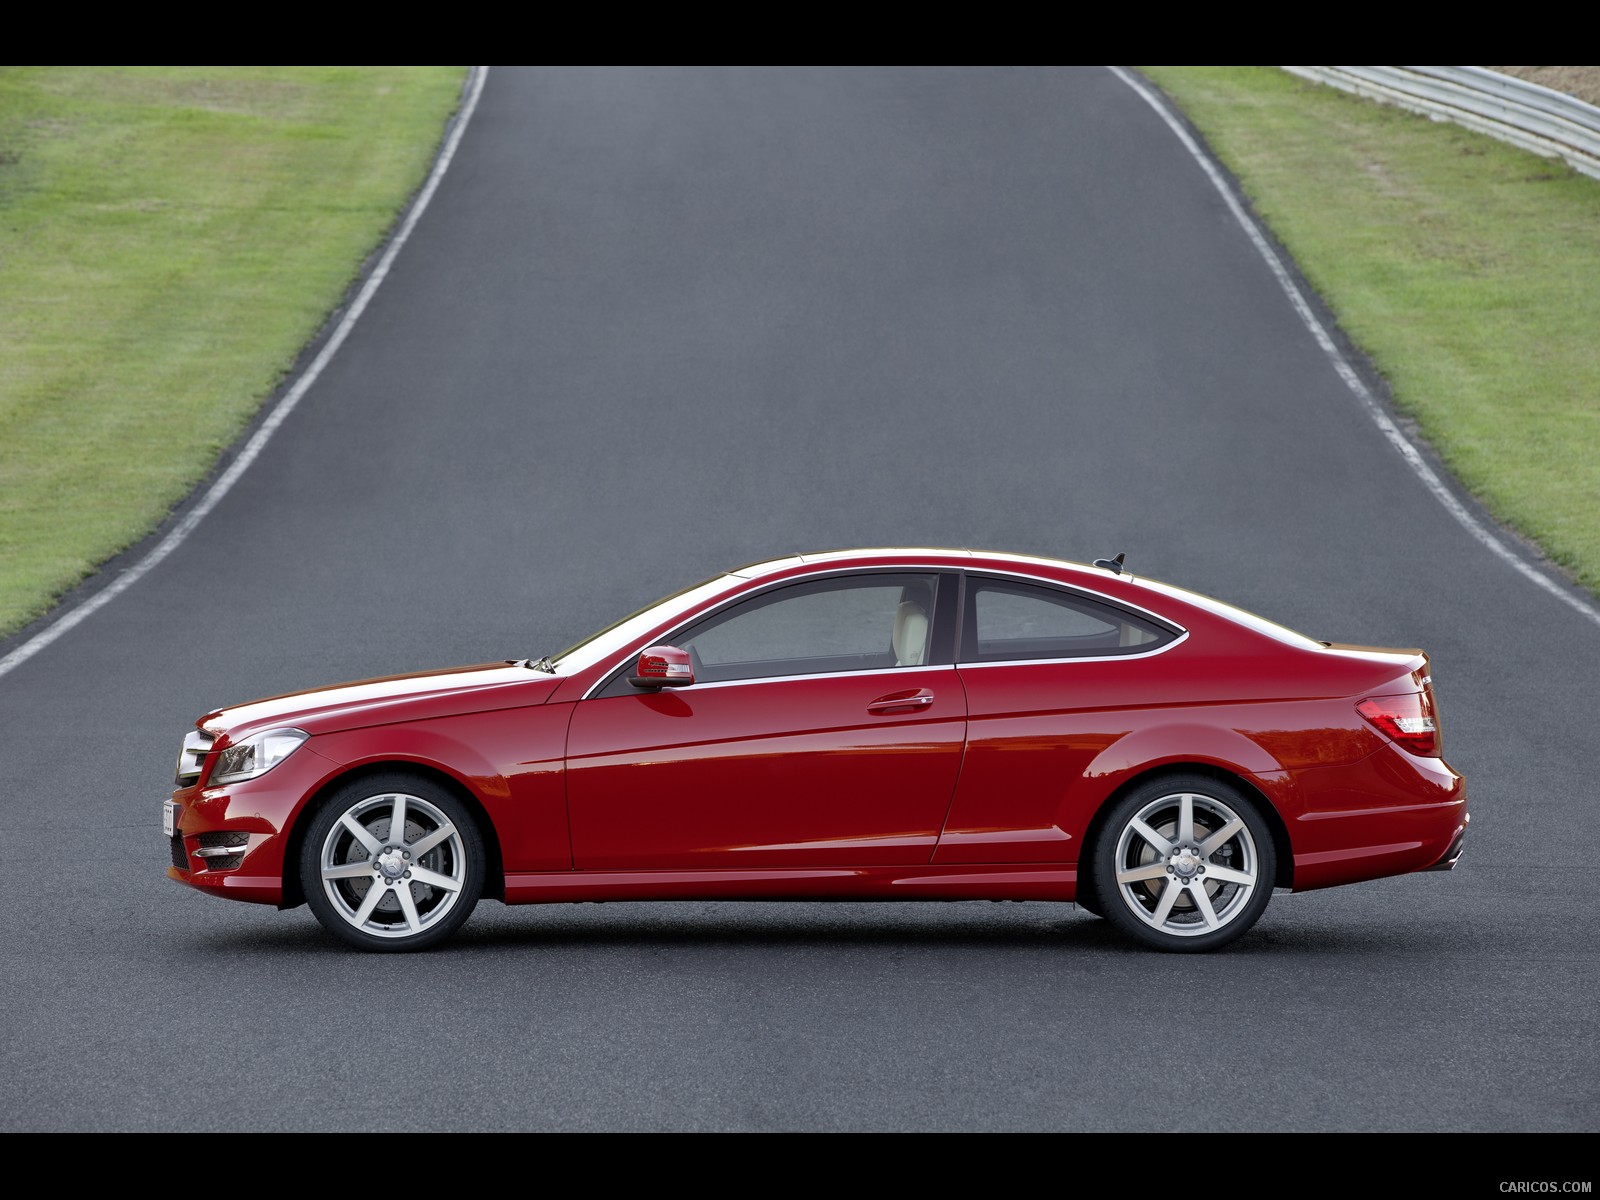 Mercedes-Benz C-Class Coupe (2012)  - Side, #38 of 79